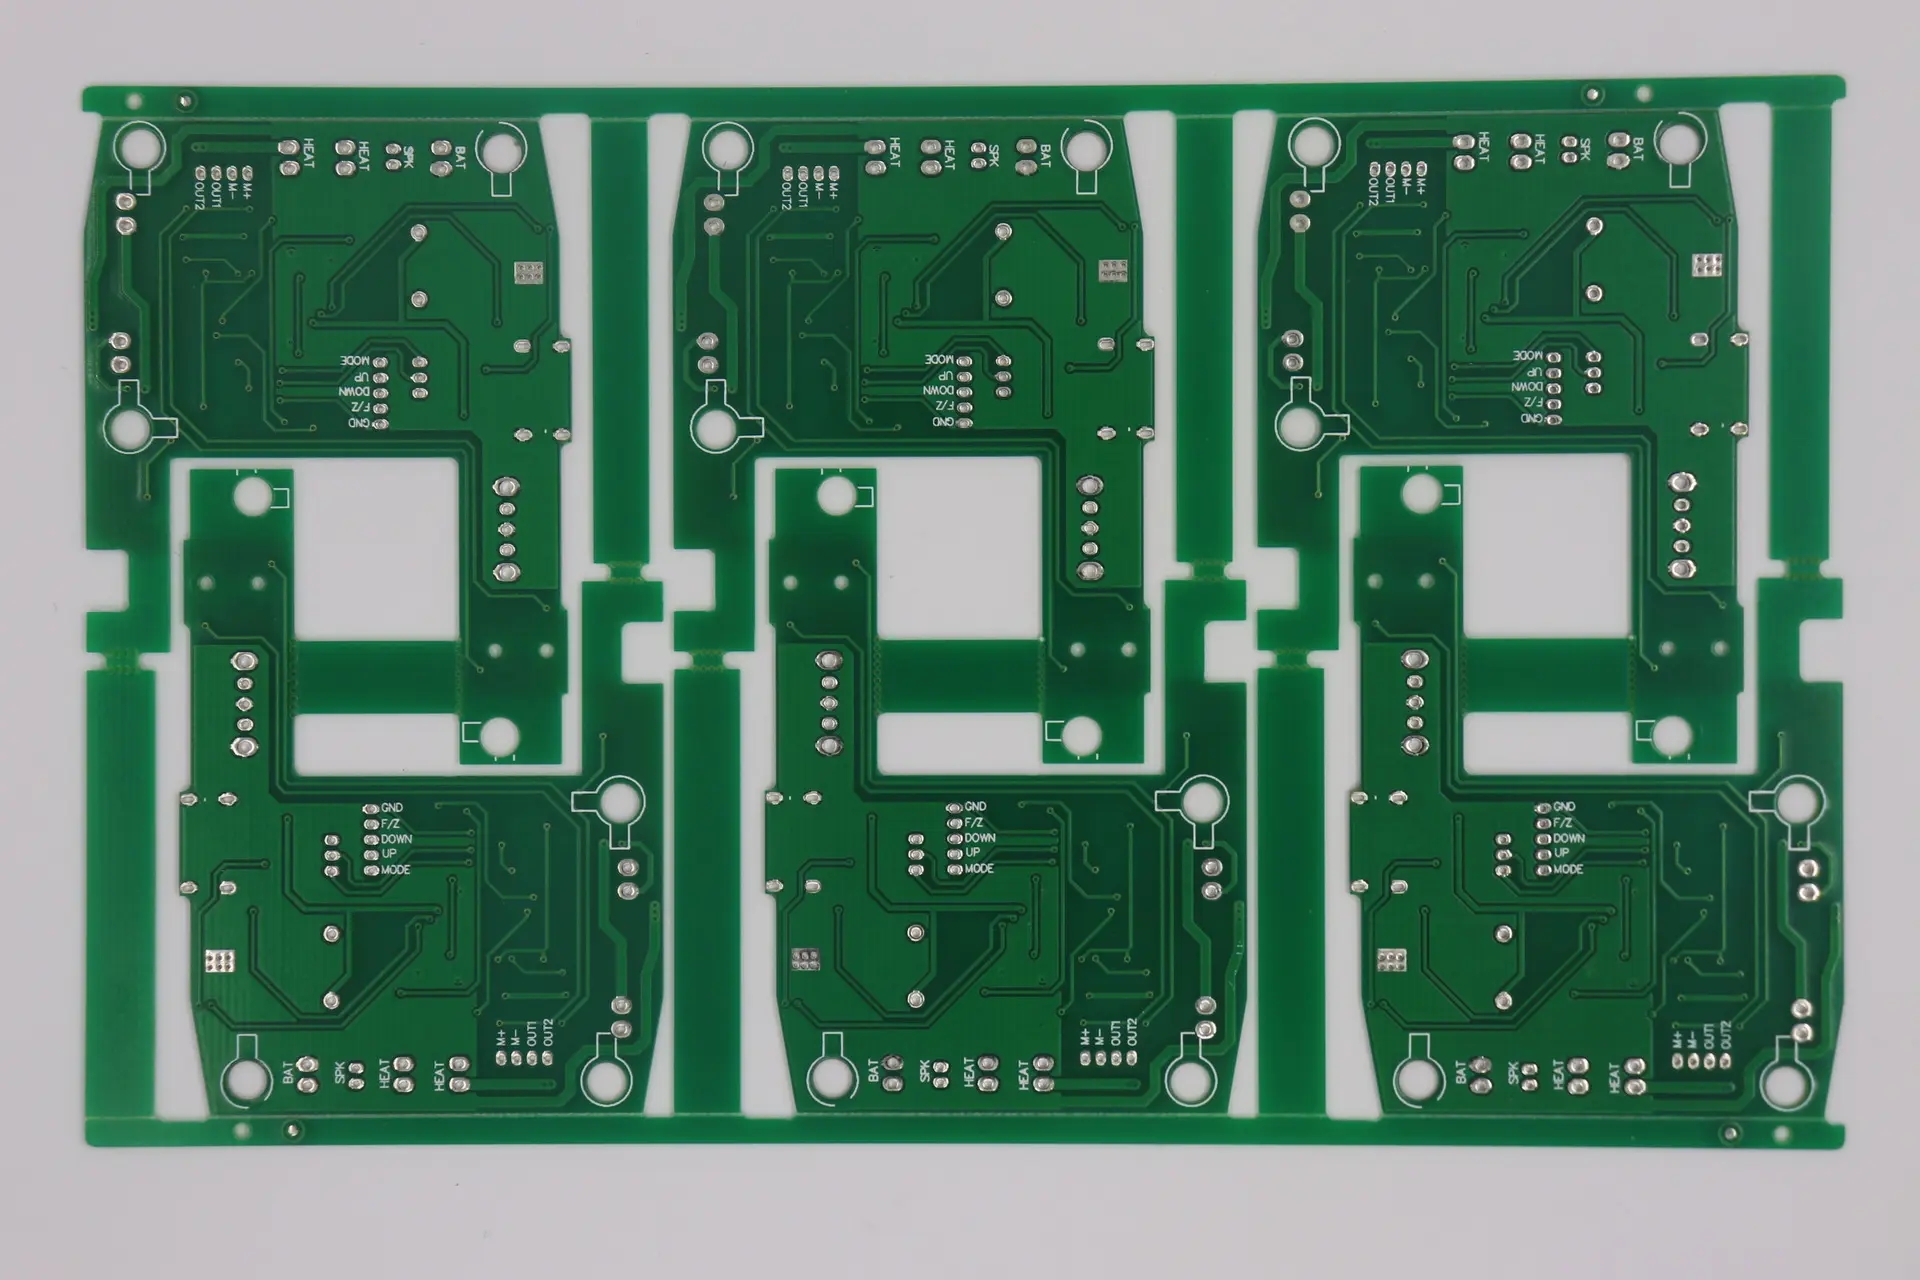 Six Skills for Selecting Components in Circuit Board Design